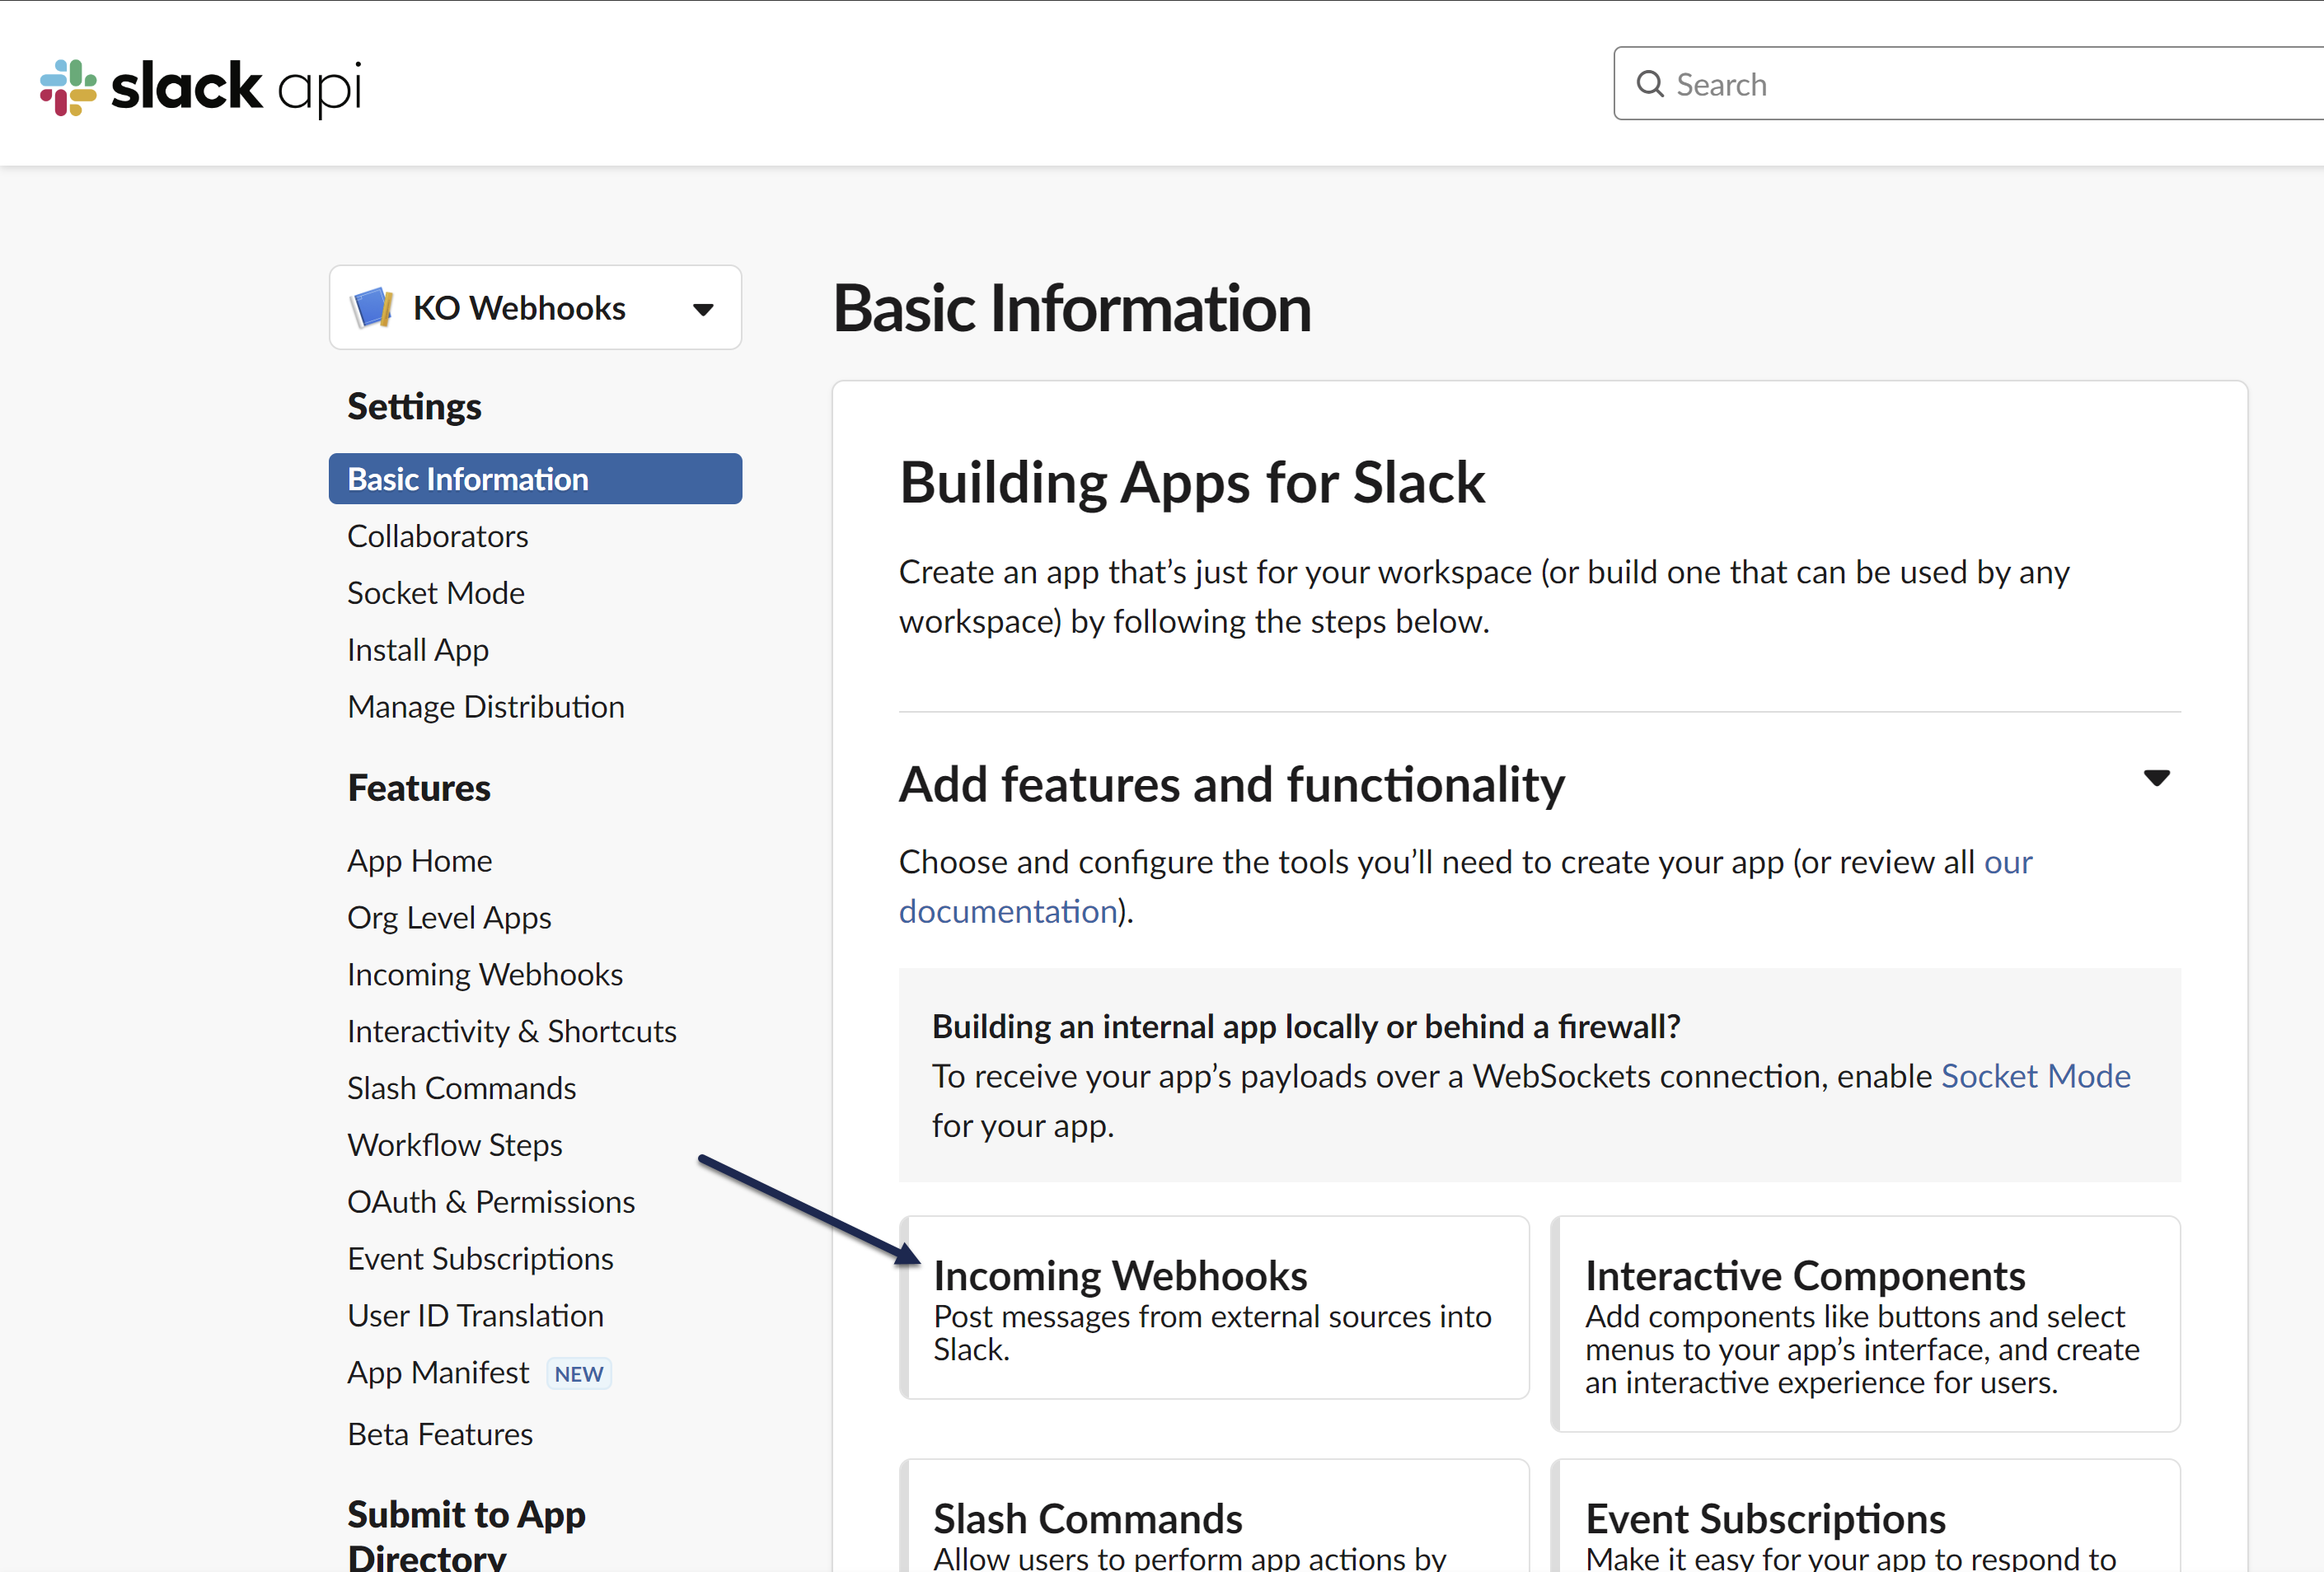 A screenshot of the Basic Information page of the Slack app with an arrow pointing to the Incoming Webhooks option in the Add features and functionality section